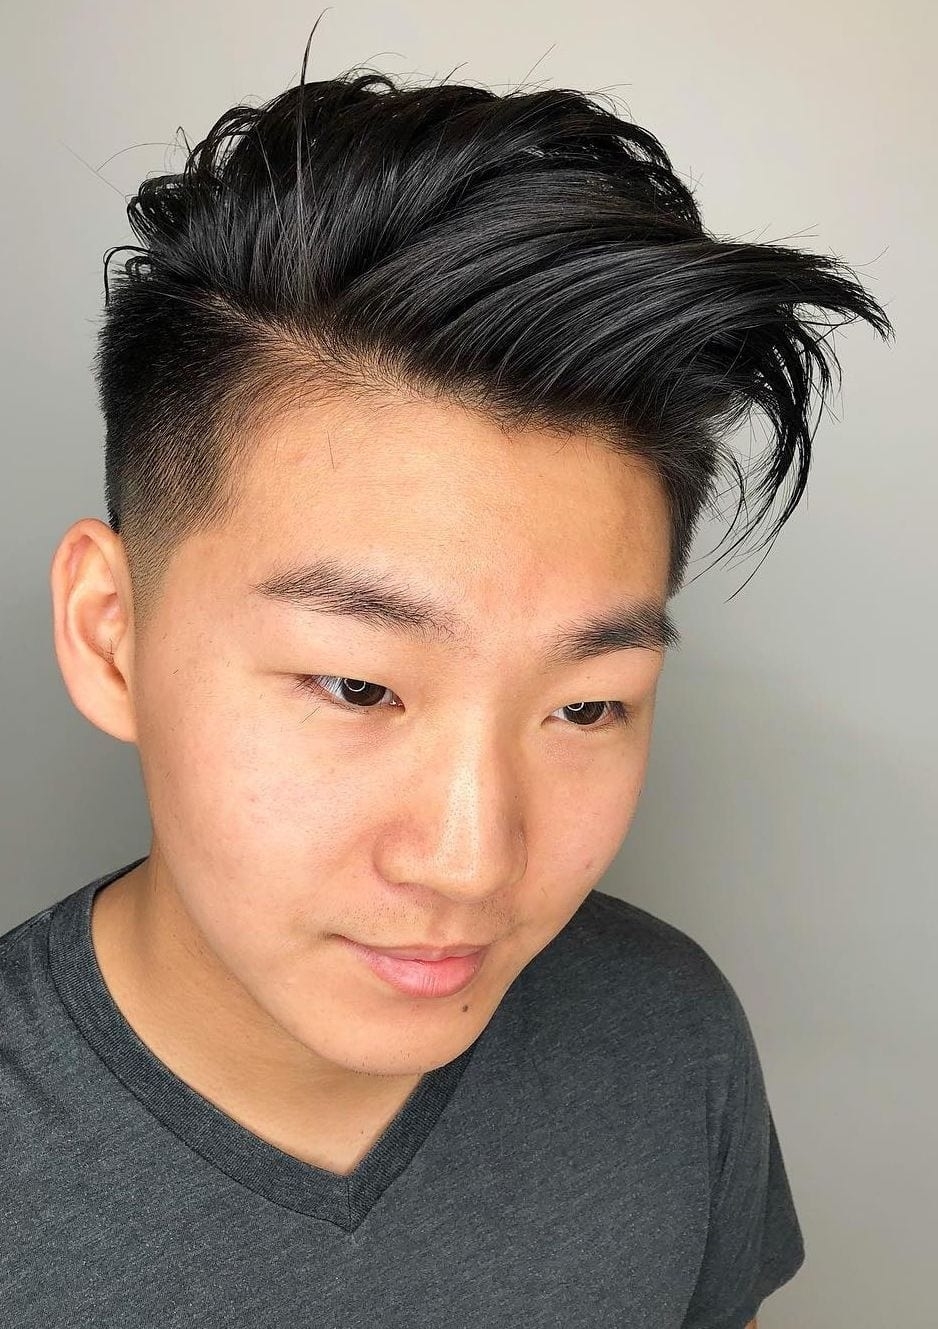 Top 30 Trendy Asian Men Hairstyles 2019 with Superb Asian Long Hairstyles Male